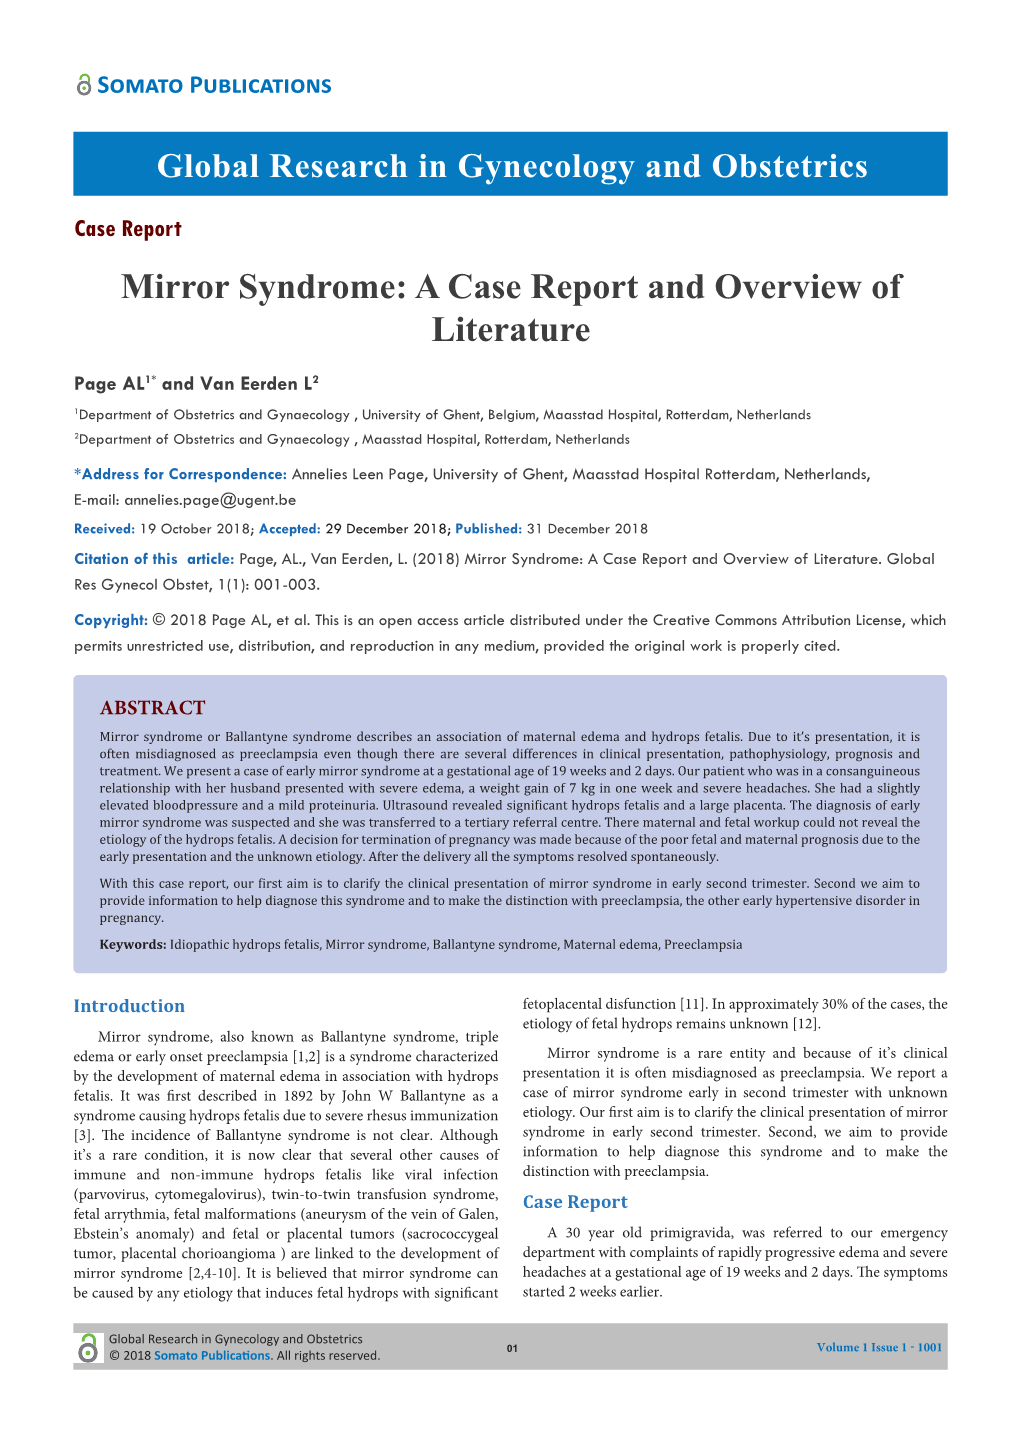 Mirror Syndrome: a Case Report and Overview of Literature